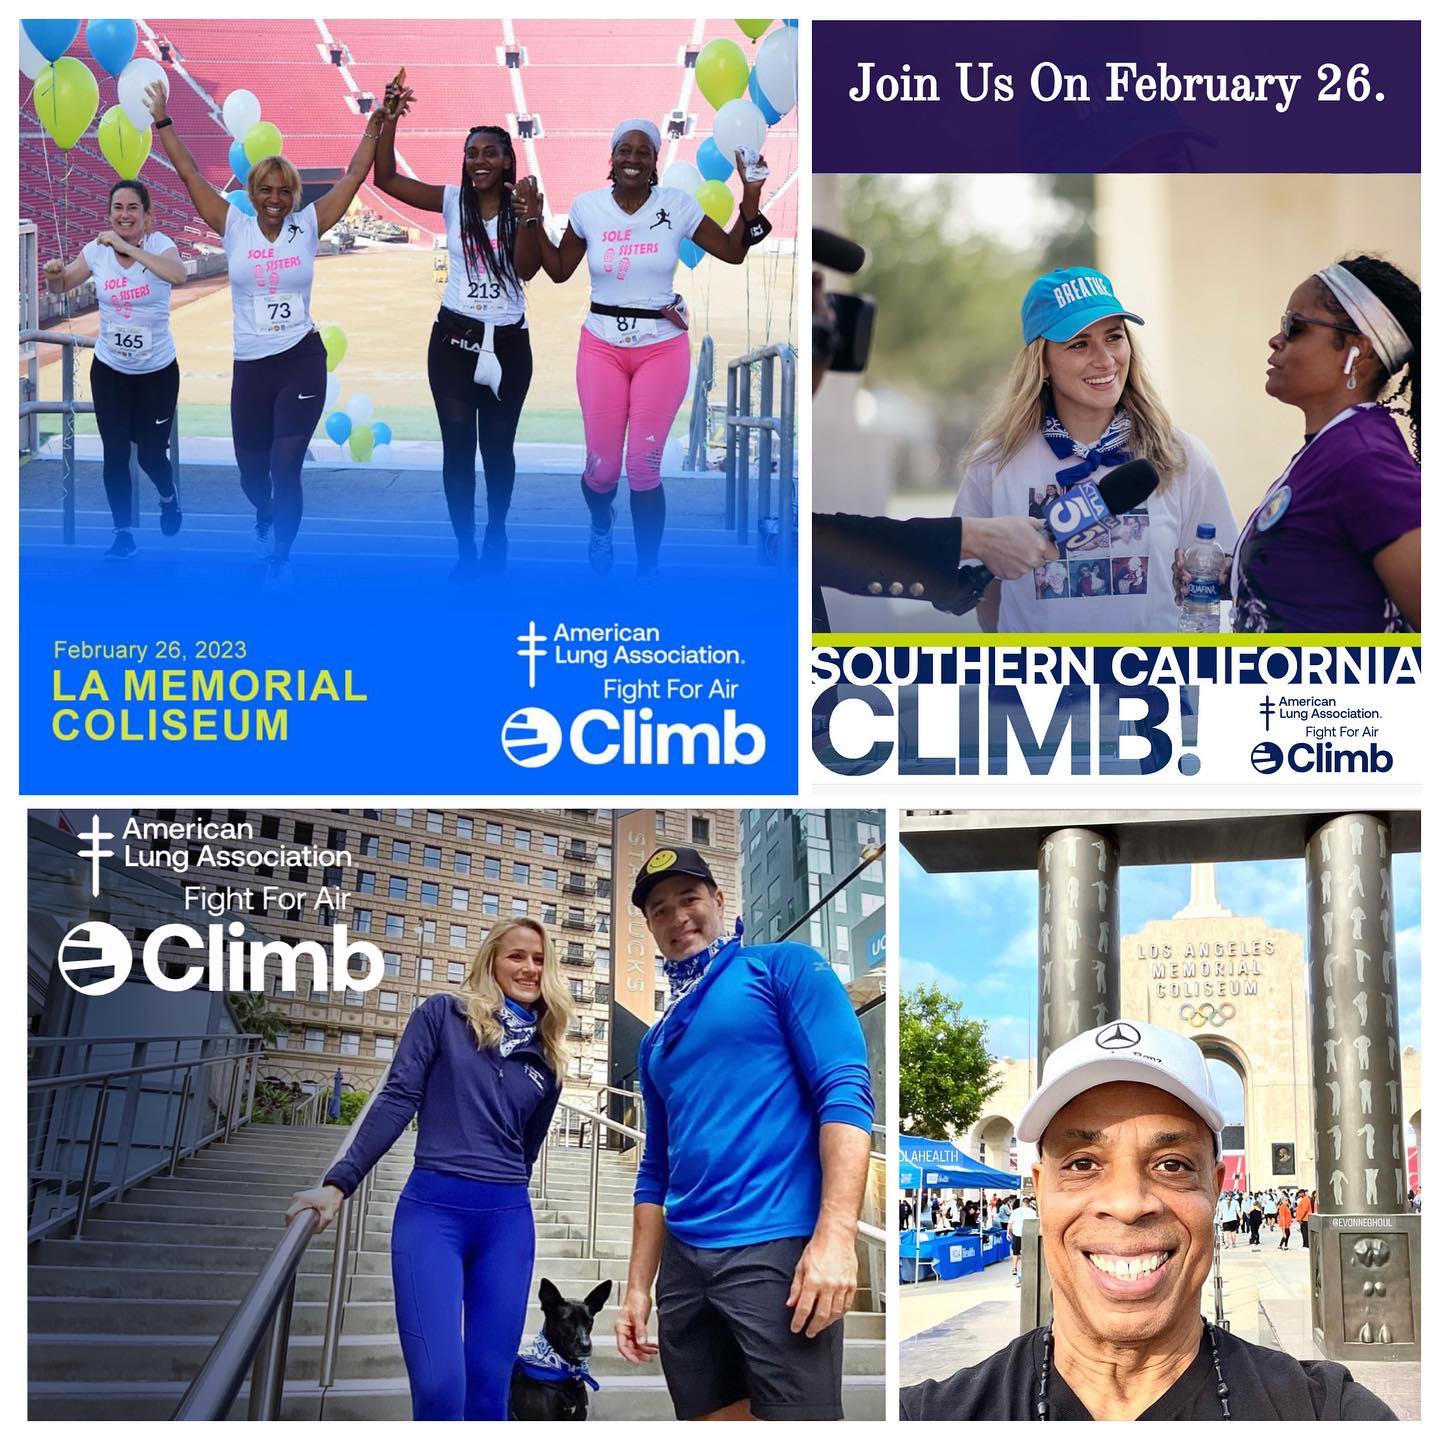 The Charity Fitness Tour rolled to The 2023 American Lung Association Fight for Air Climb at LA Memorial Coliseum.